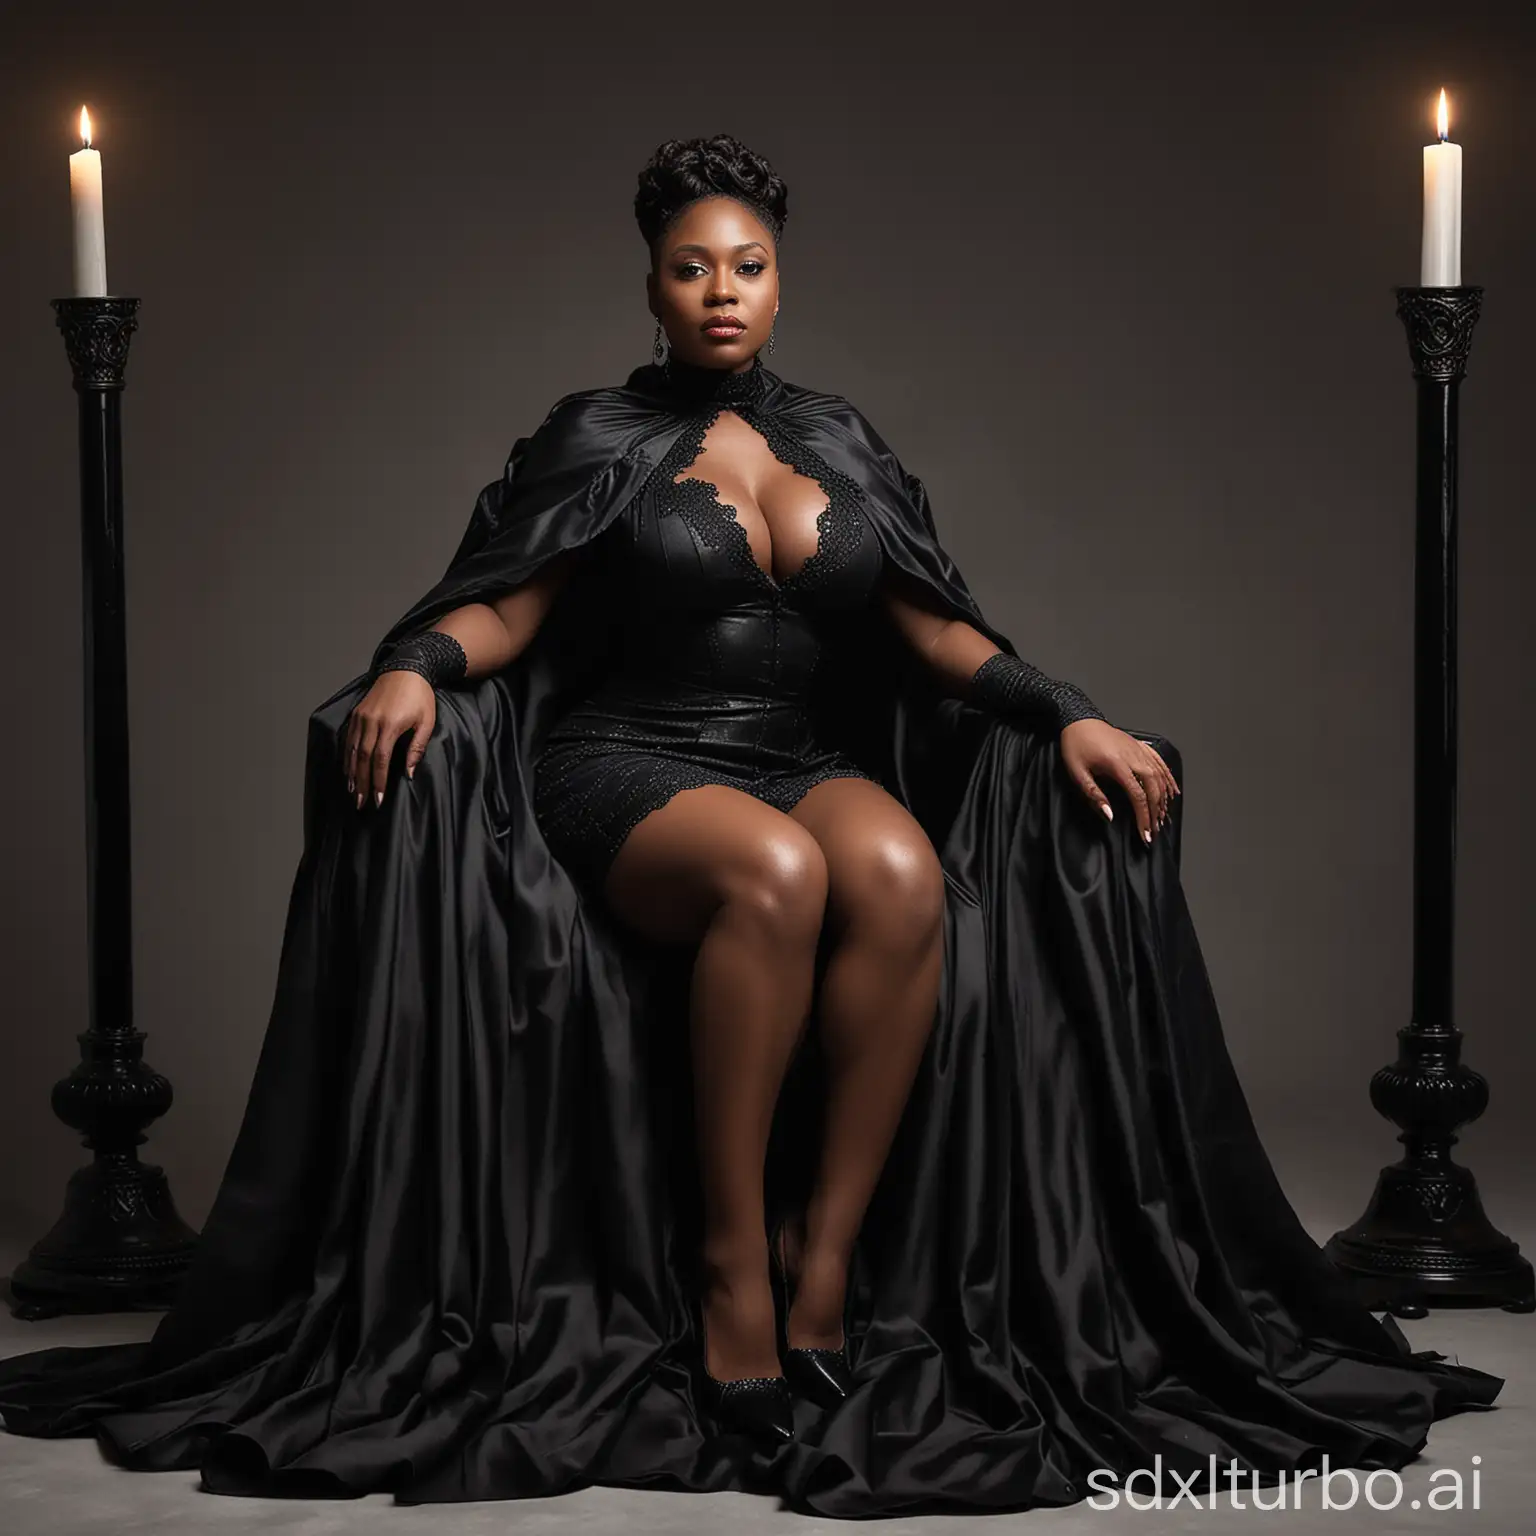 Majestic-Black-Queen-on-Throne-Powerful-and-Graceful-Portrait